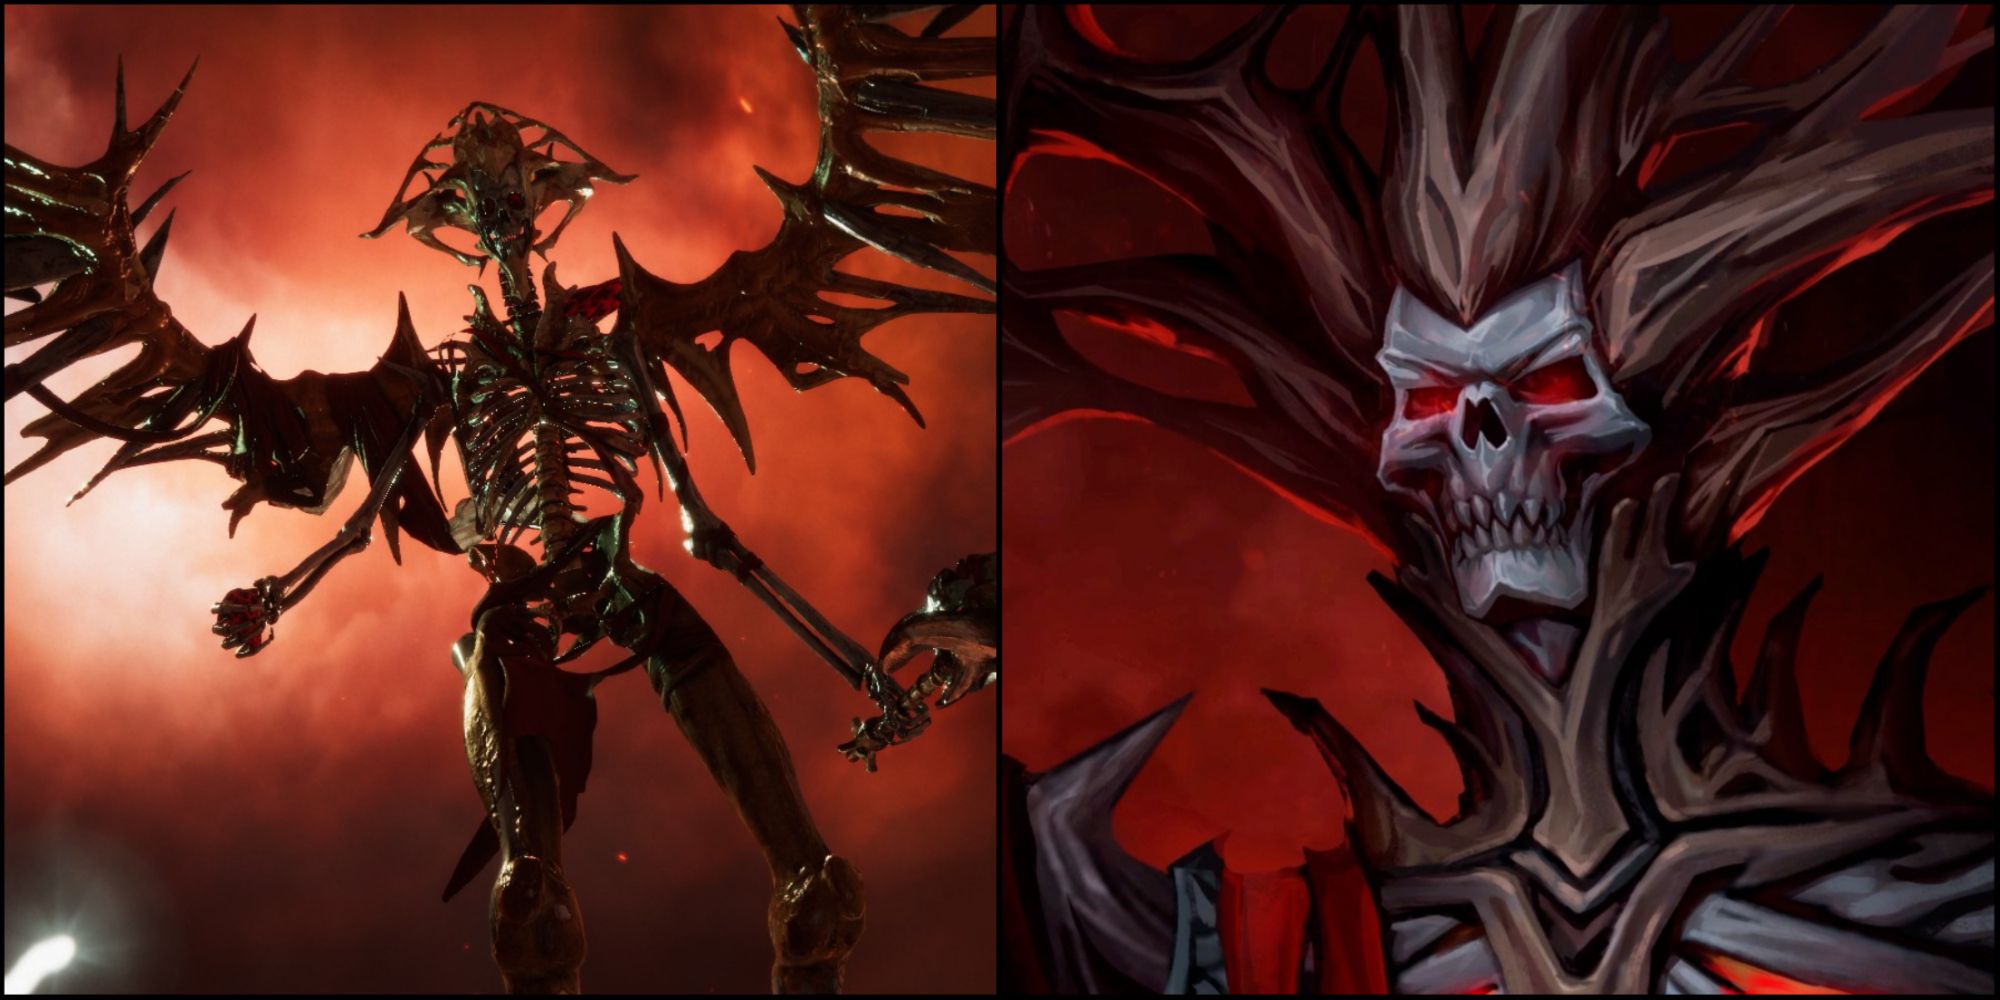 The Red Judge in both sides. On the left, in-game. On the right, artwork.